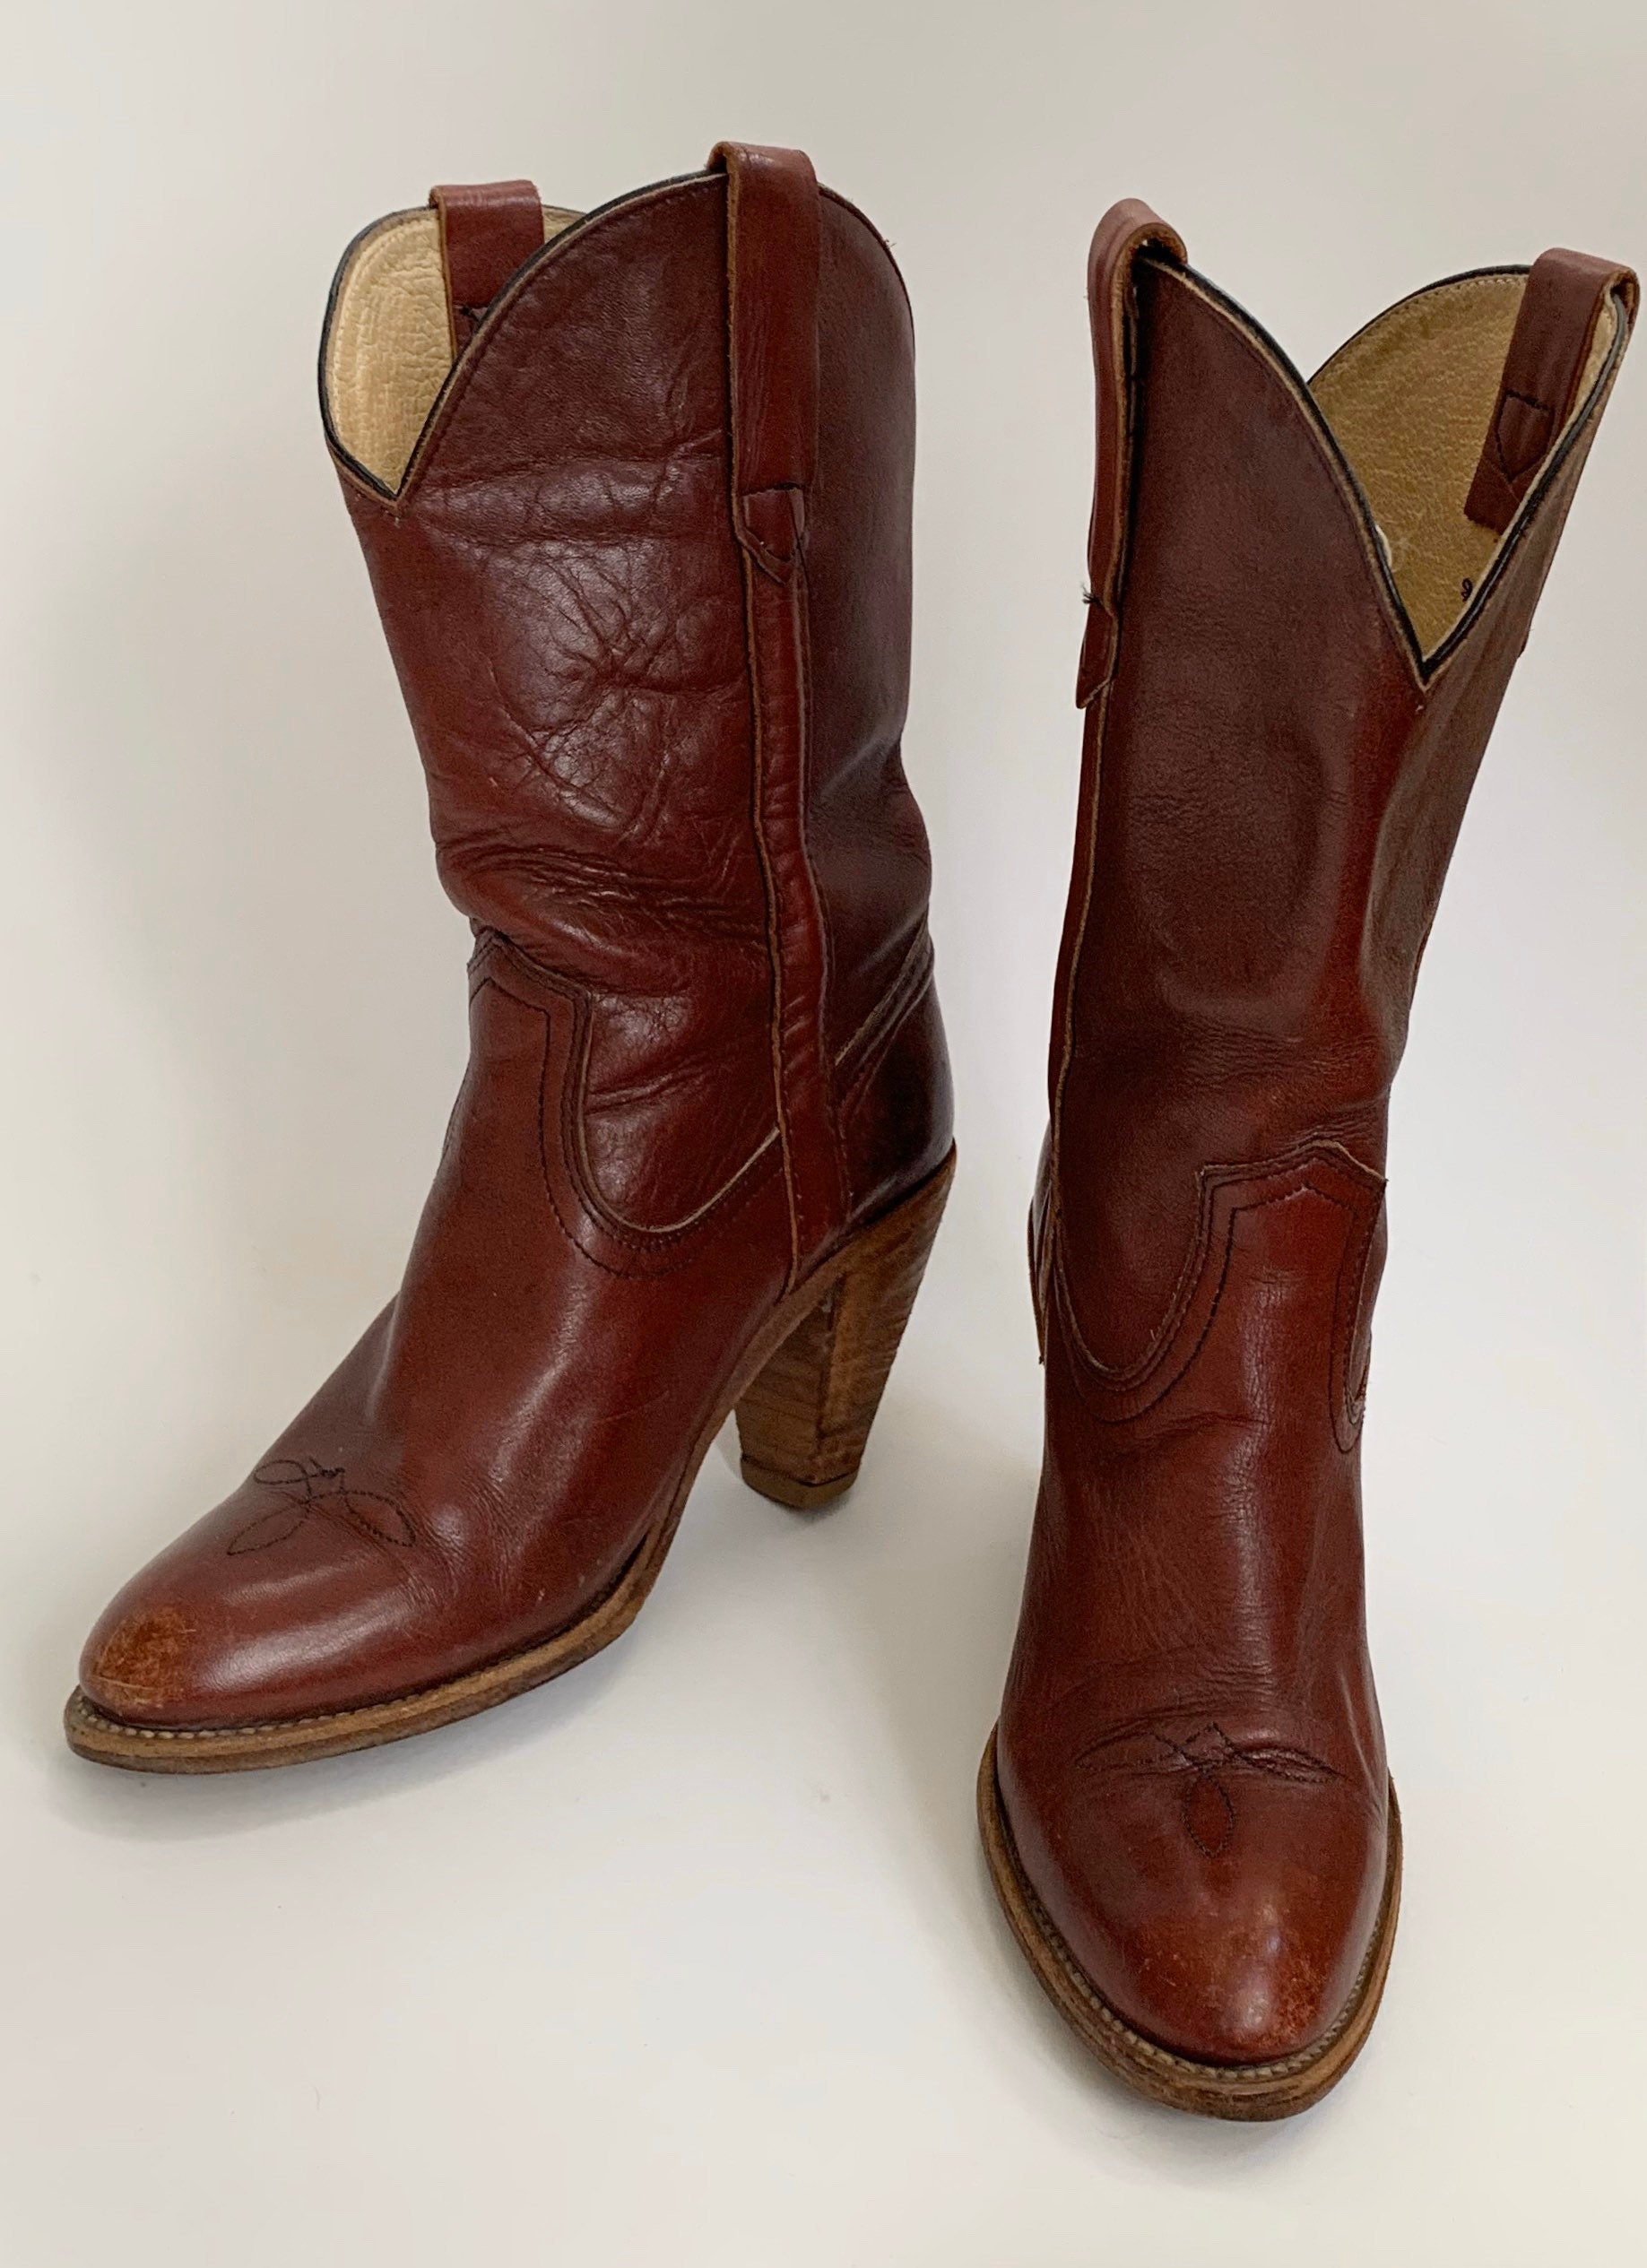 Vintage 70s Stacked Heel Dexter Boots Selected by MARMALADE